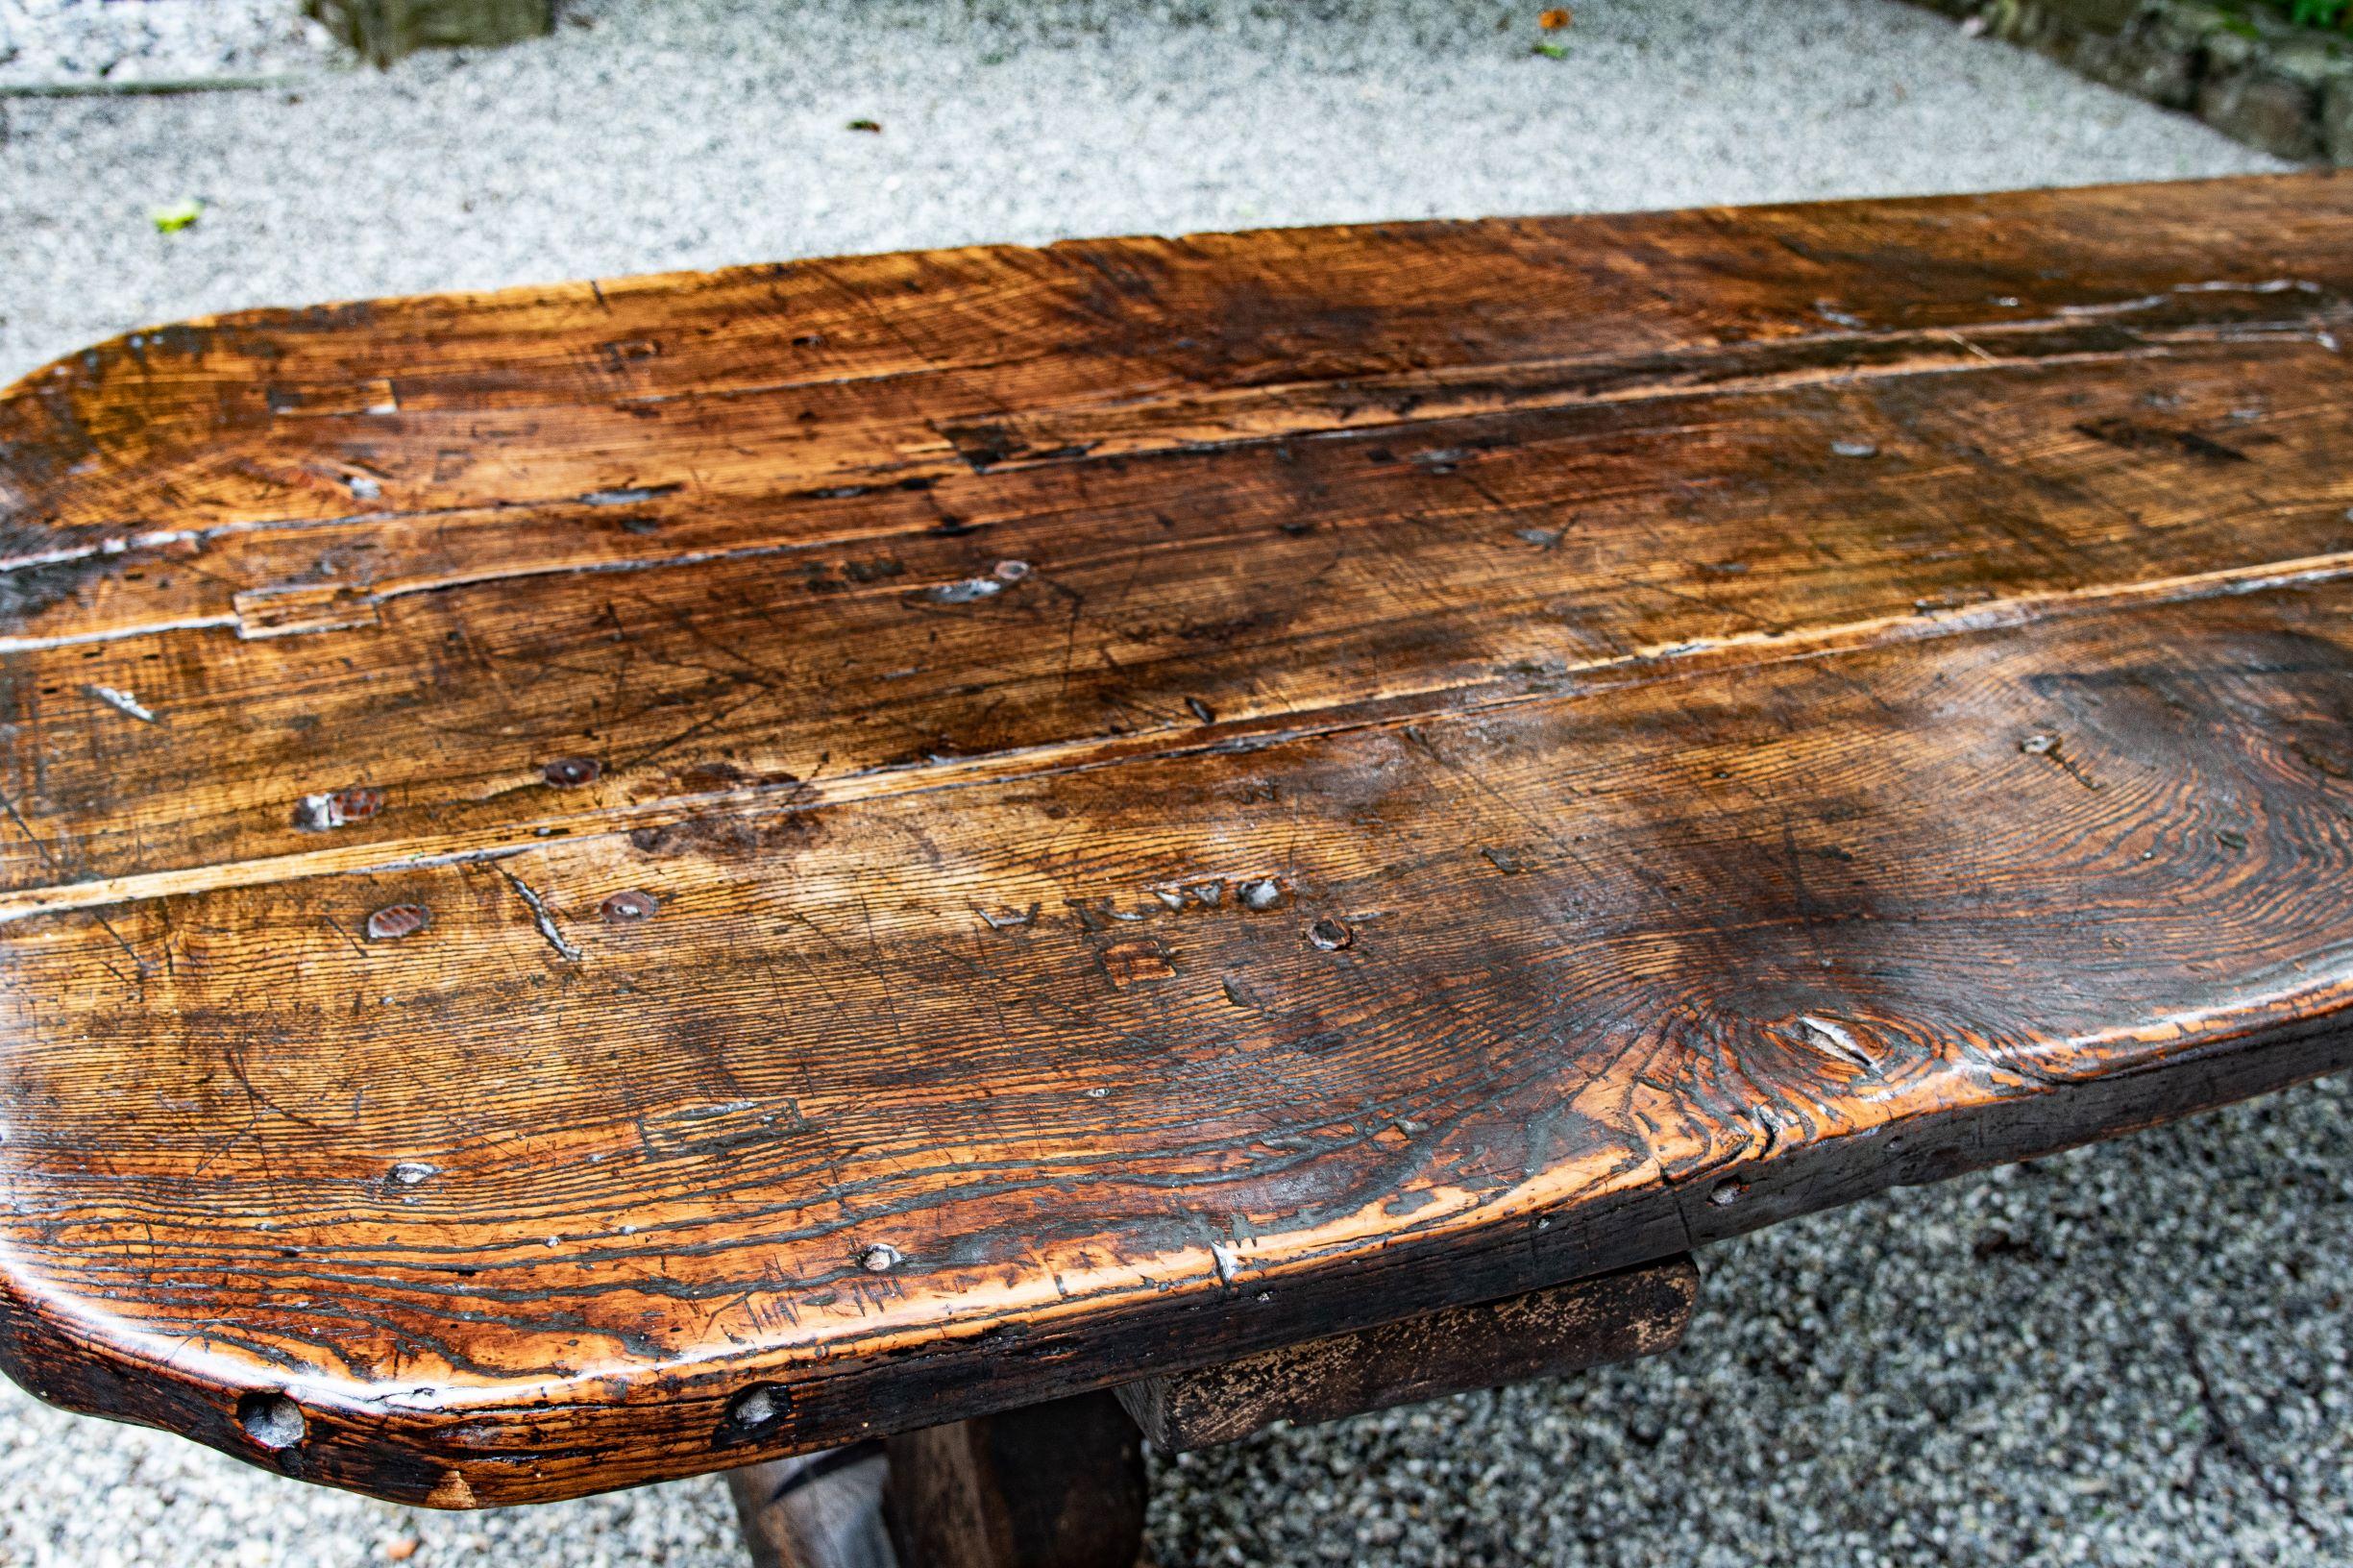 Fabulous late 16th century, possibly early 17th century Welsh oak refectory table. Absolutely superb color and patina. The long planked top sits over a single hidden stretcher on two sledge feet, circa 1590-1630. The table is well preserved, and